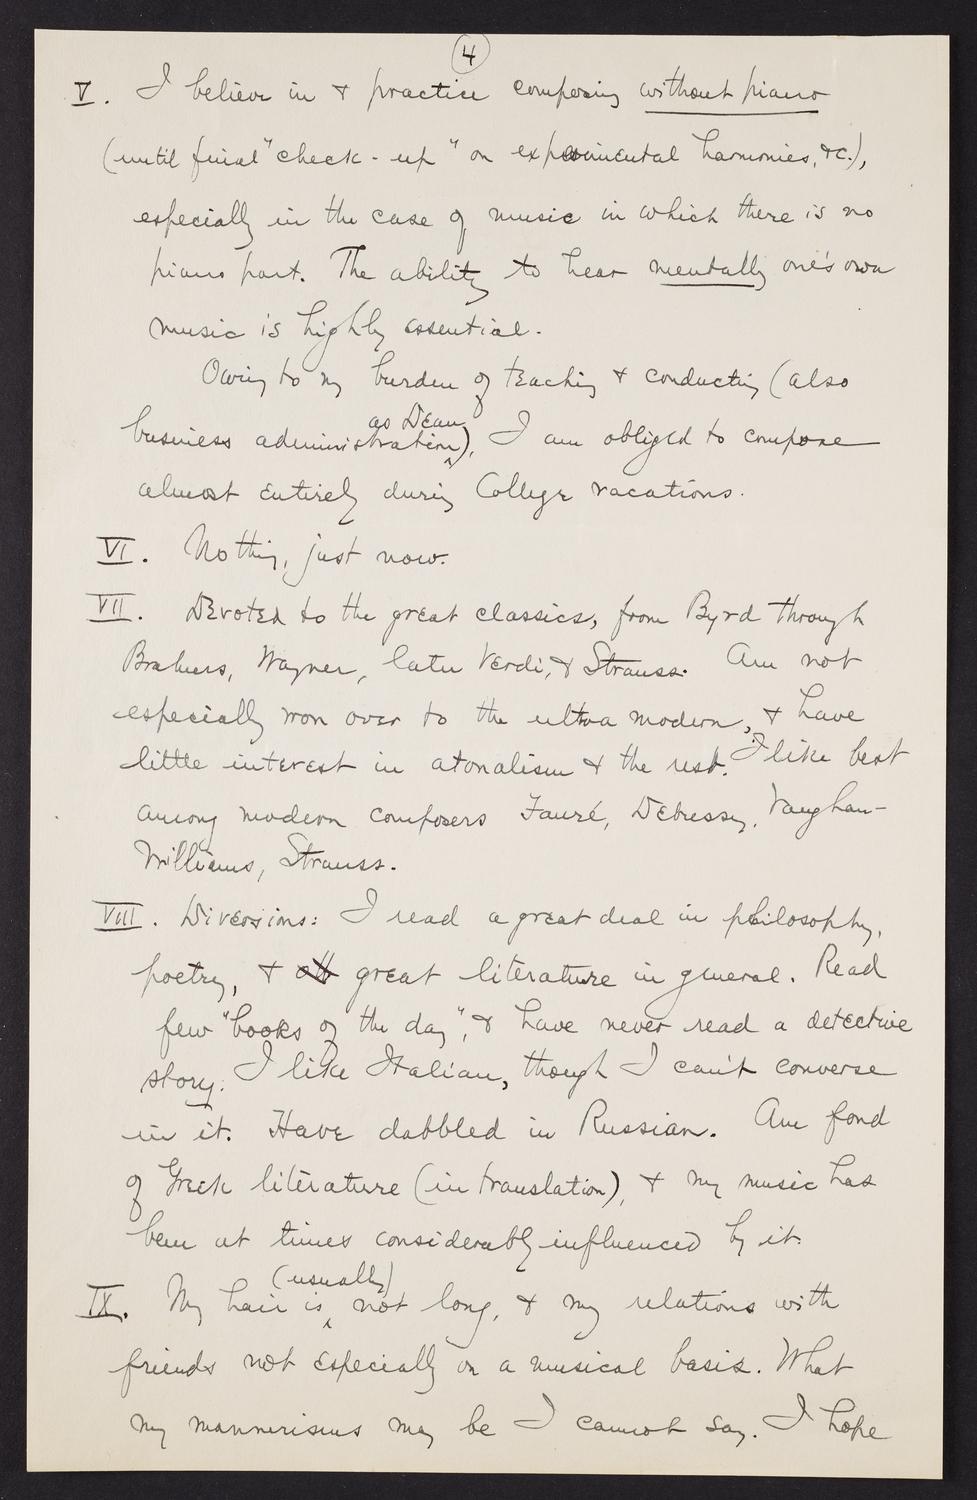 Correspondence from David Stanley Smith to David Ewen, page 4 of 5